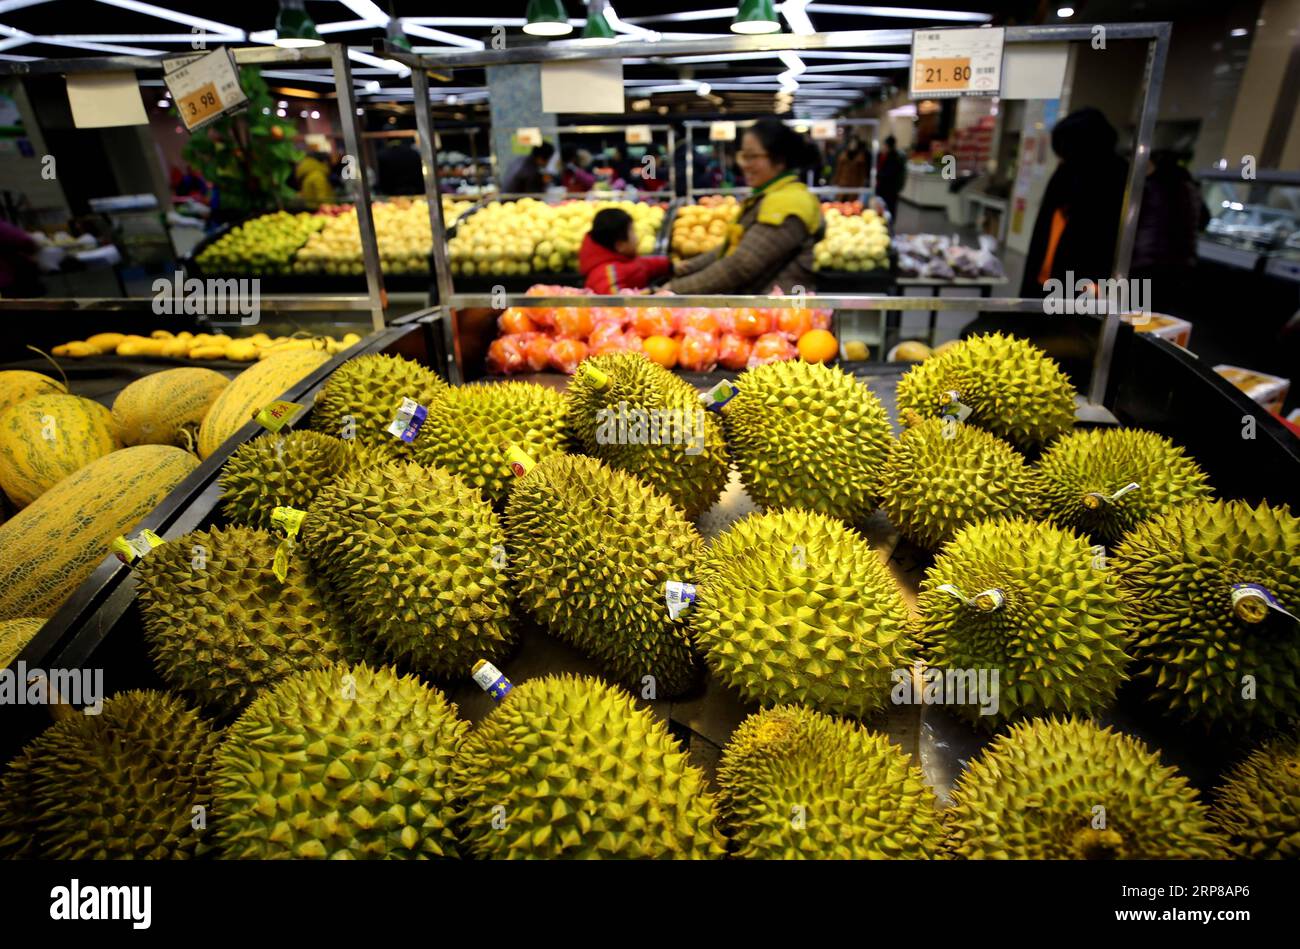 (190225) -- BEIJING, Feb. 25, 2019 -- Customers choose fruits at a supermarket in Jing an County of Yichun City, east China s Jiangxi Province, Jan. 9, 2019. China has unveiled a guideline to enhance the accountability system of local governments to strengthen supervision over food safety. Food safety will be included in the performance assessment of the Party and government leading officials, according to the guideline released by the Central Committee of the Communist Party of China (CPC) and the State Council over the weekend. The guideline aims to promote local government s food safety wor Stock Photo